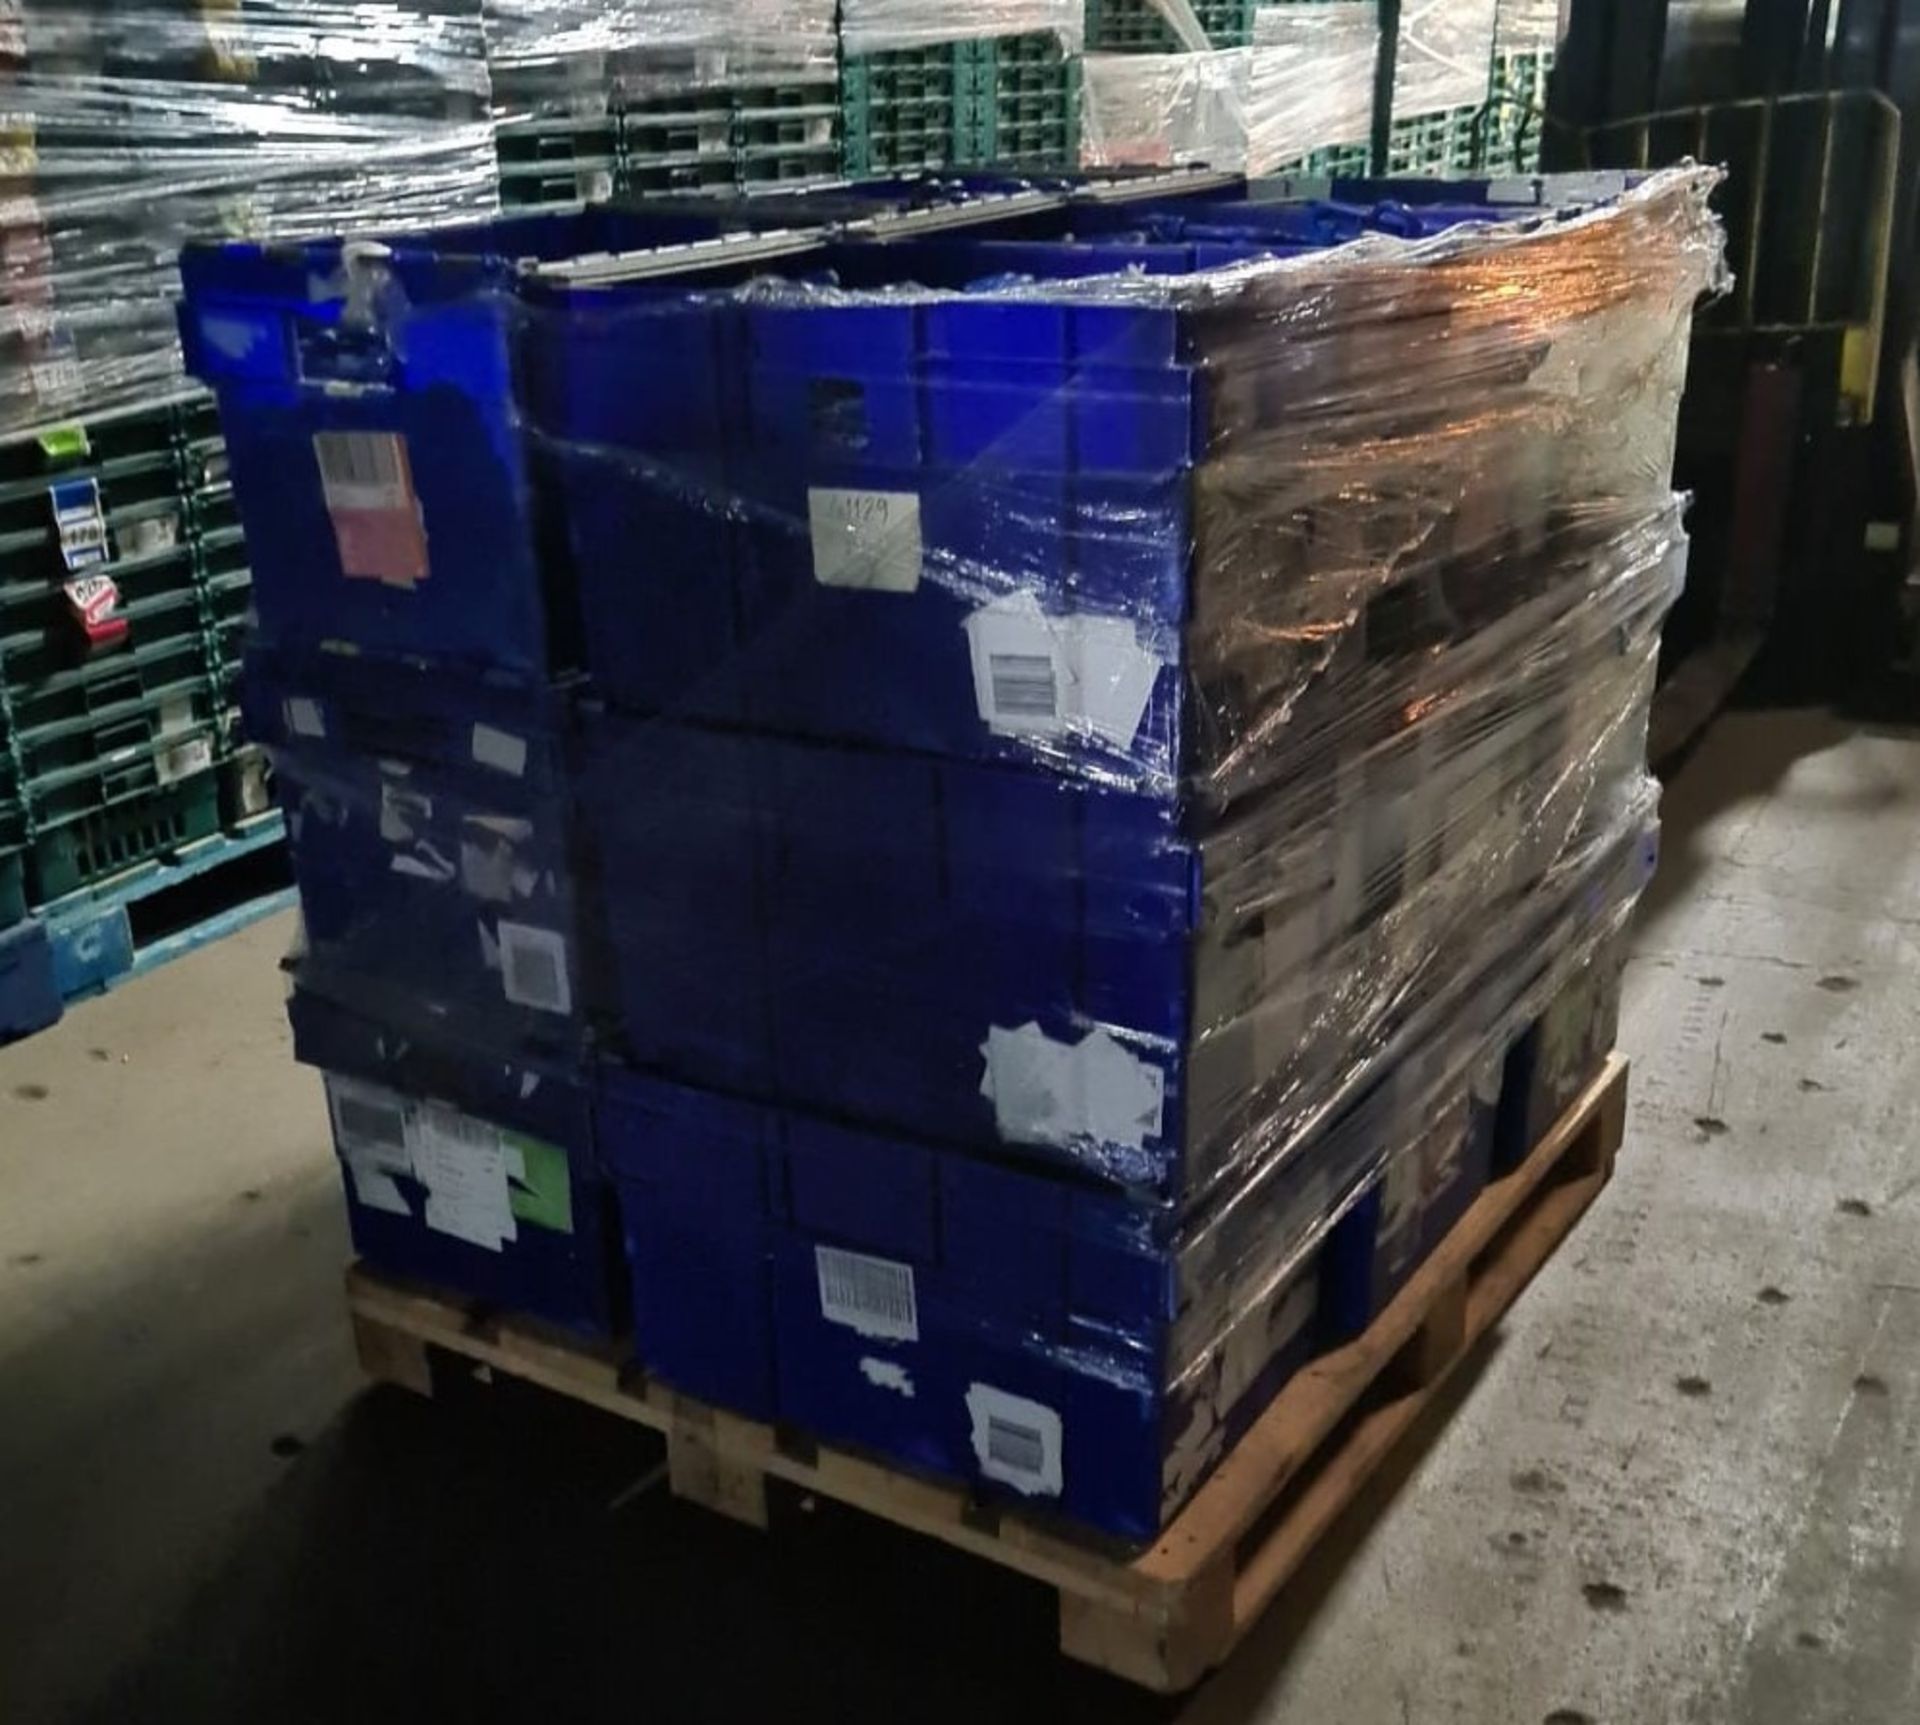 Pallet of 30 x used Blue Solid industrial storage containers/tote boxes from M&S. - Image 3 of 3